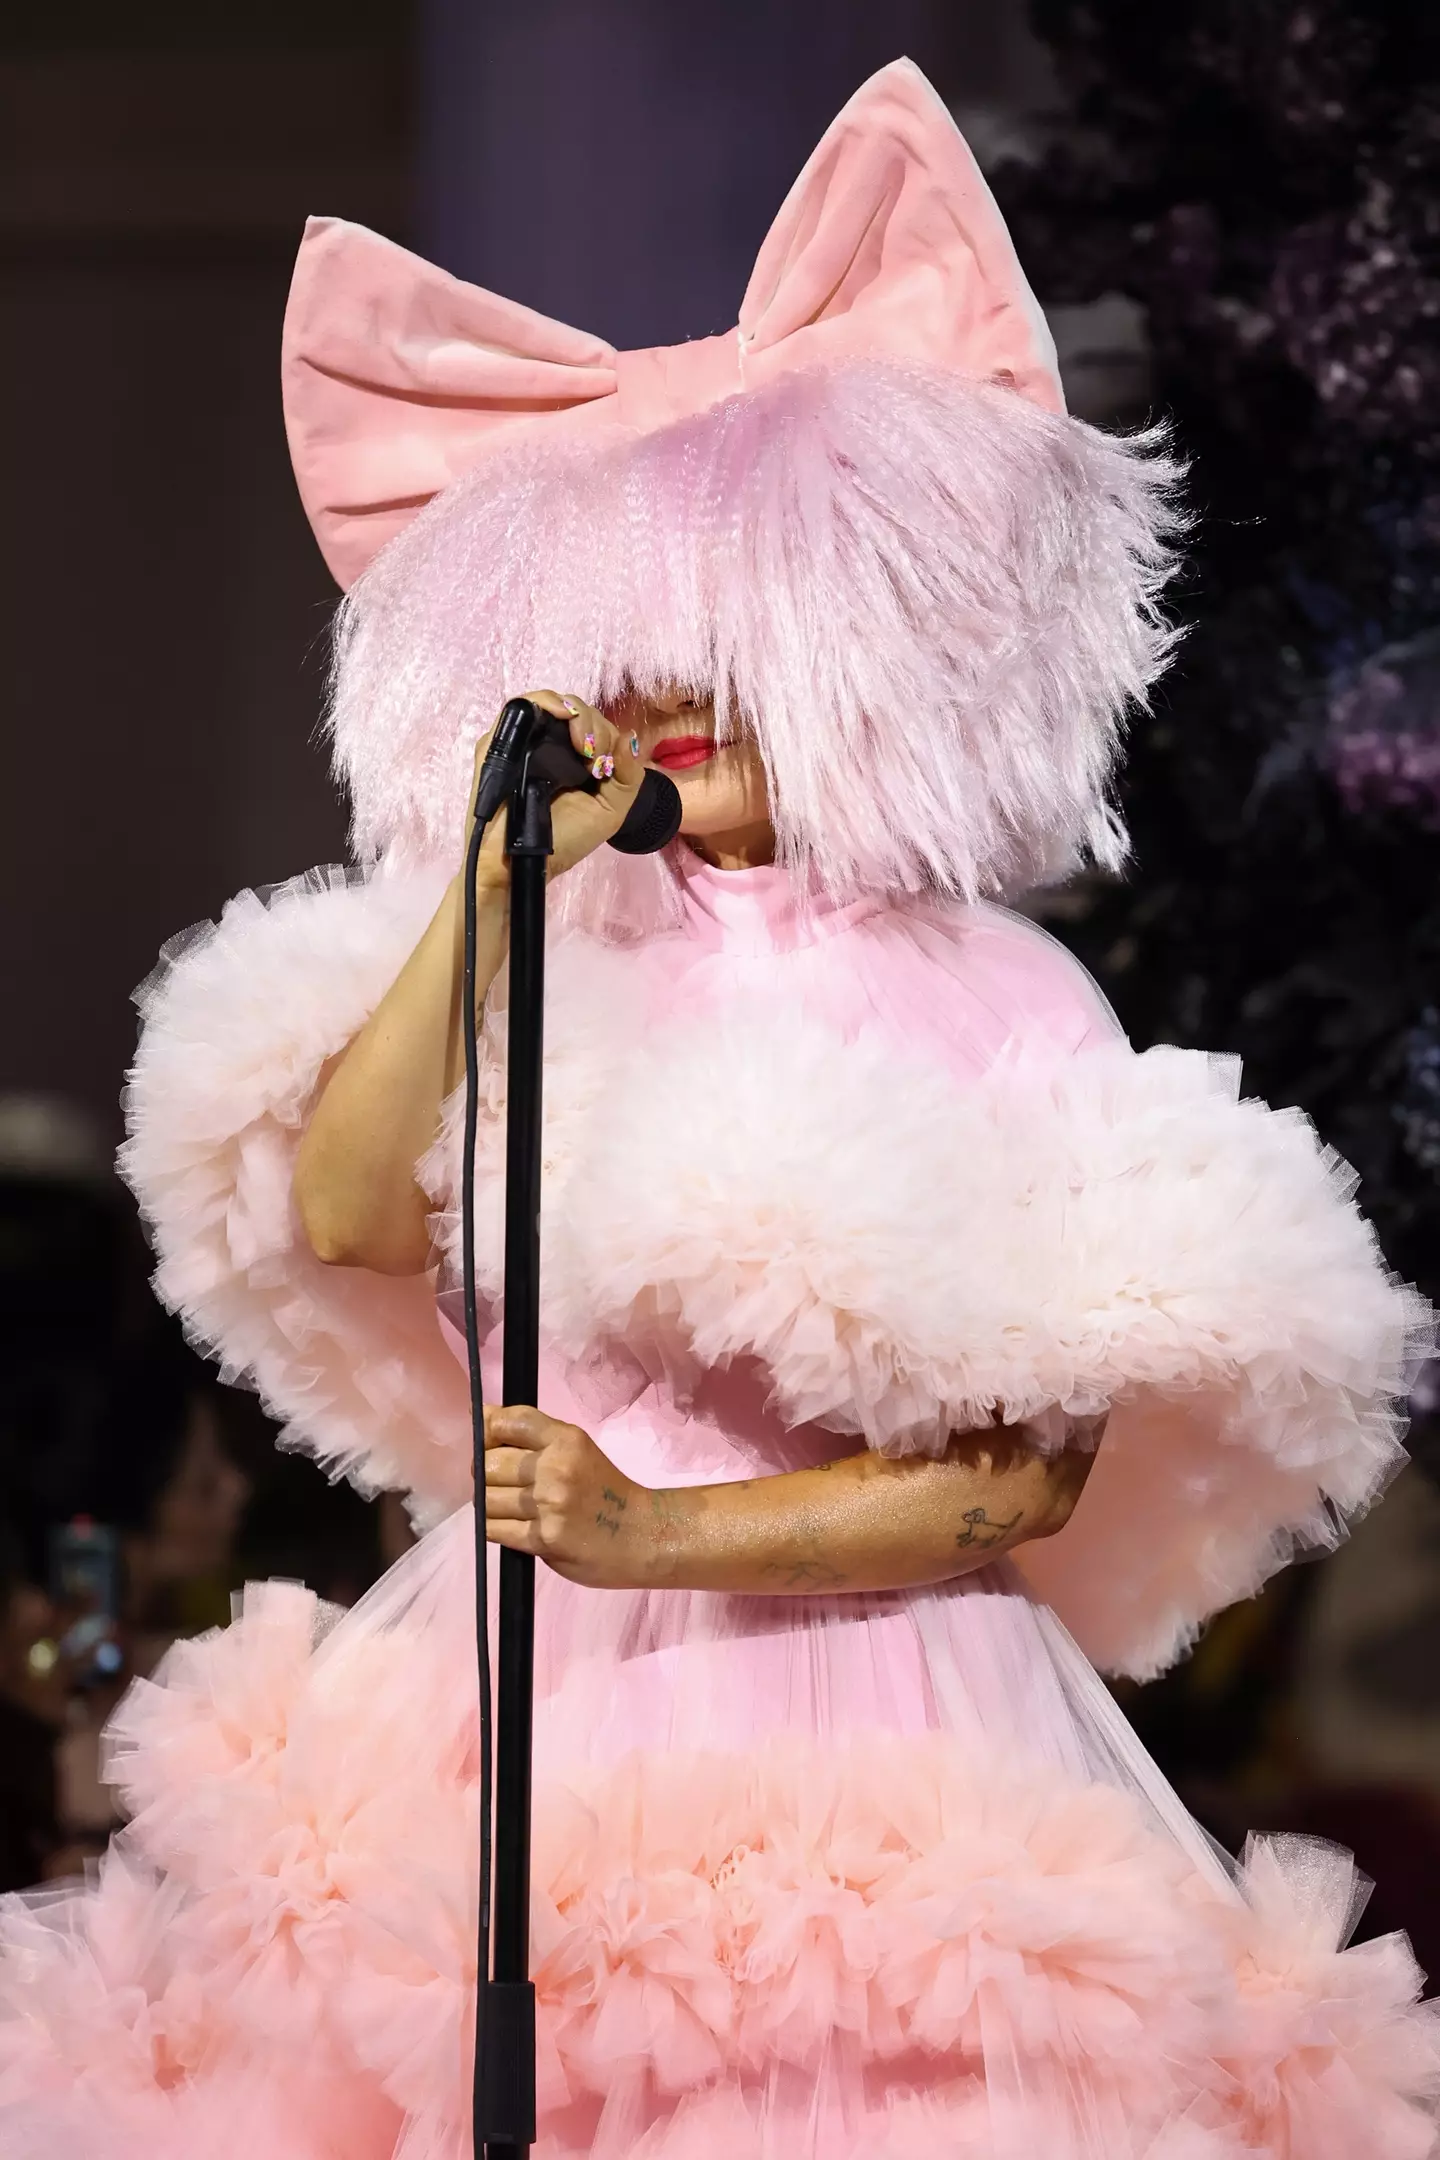 The Aussie singer is known for concealing her face with giant wigs.